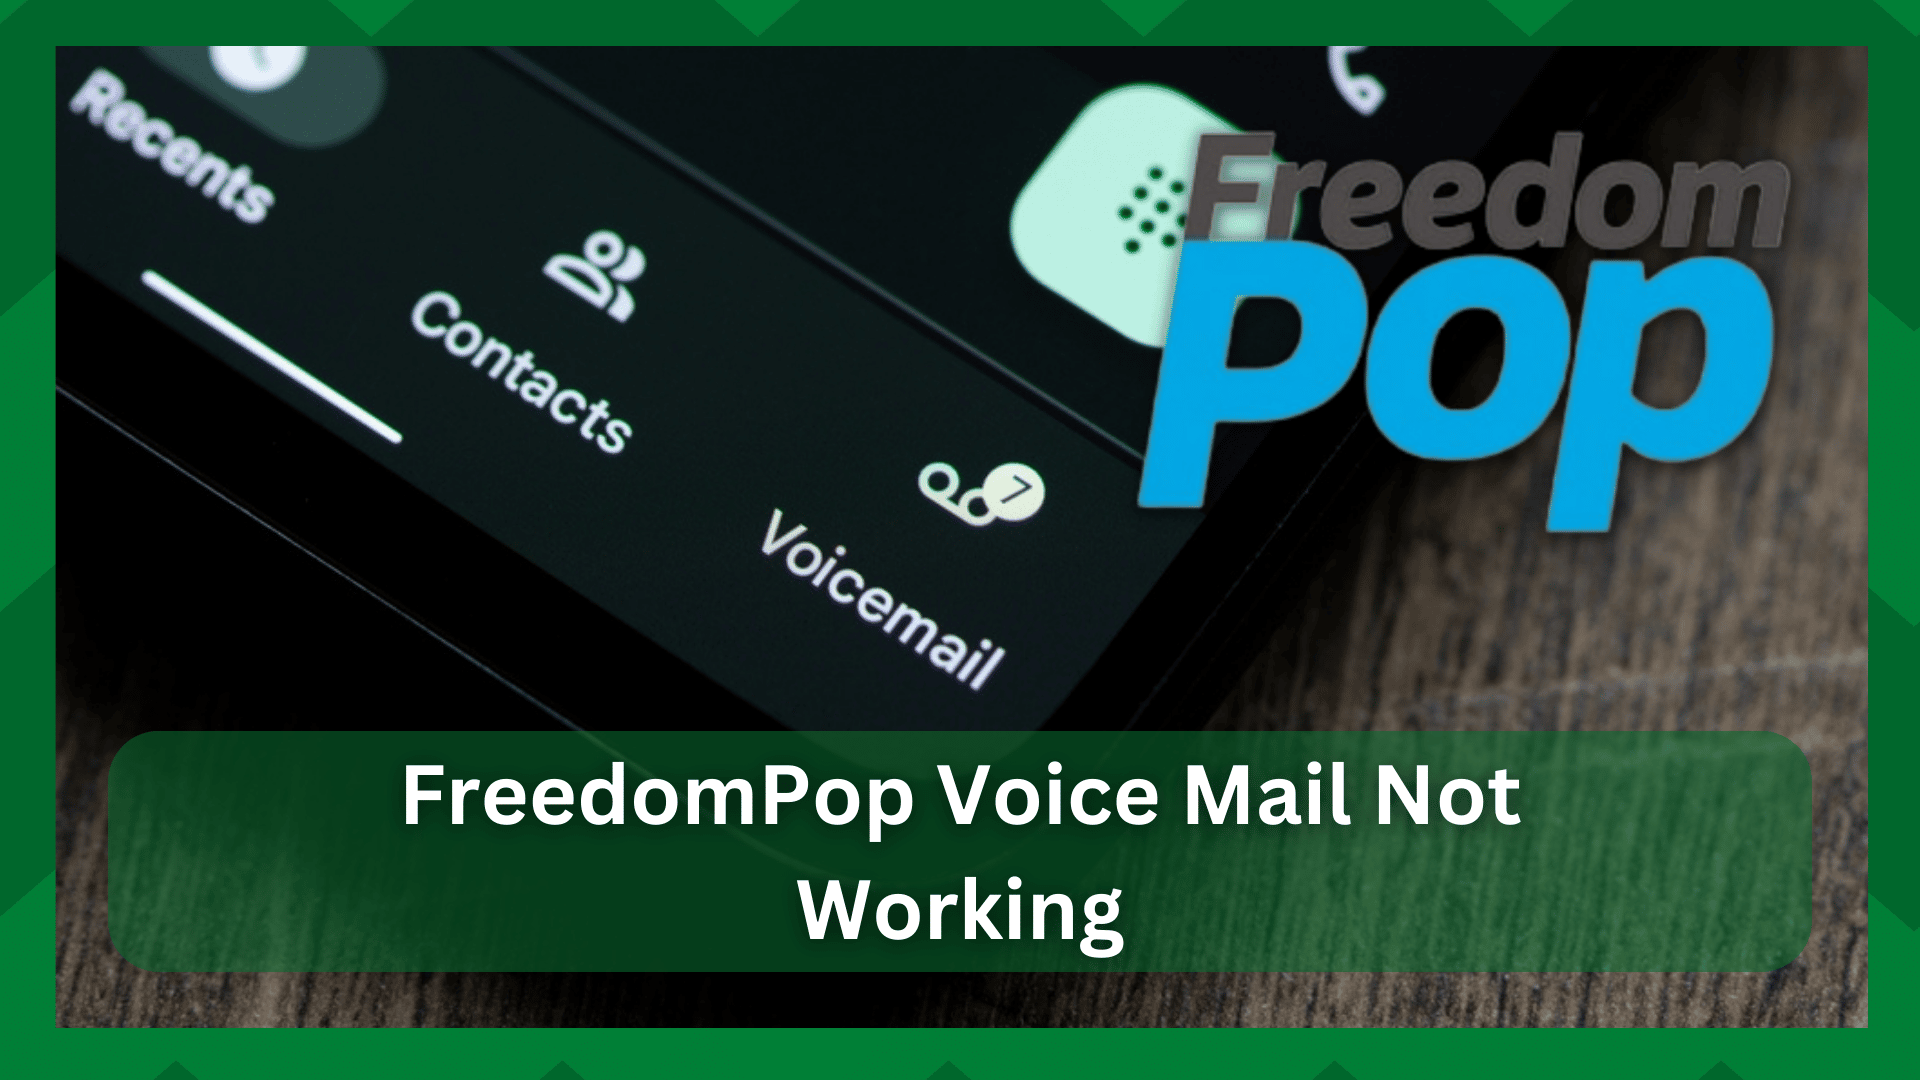 freedompop voicemail not working